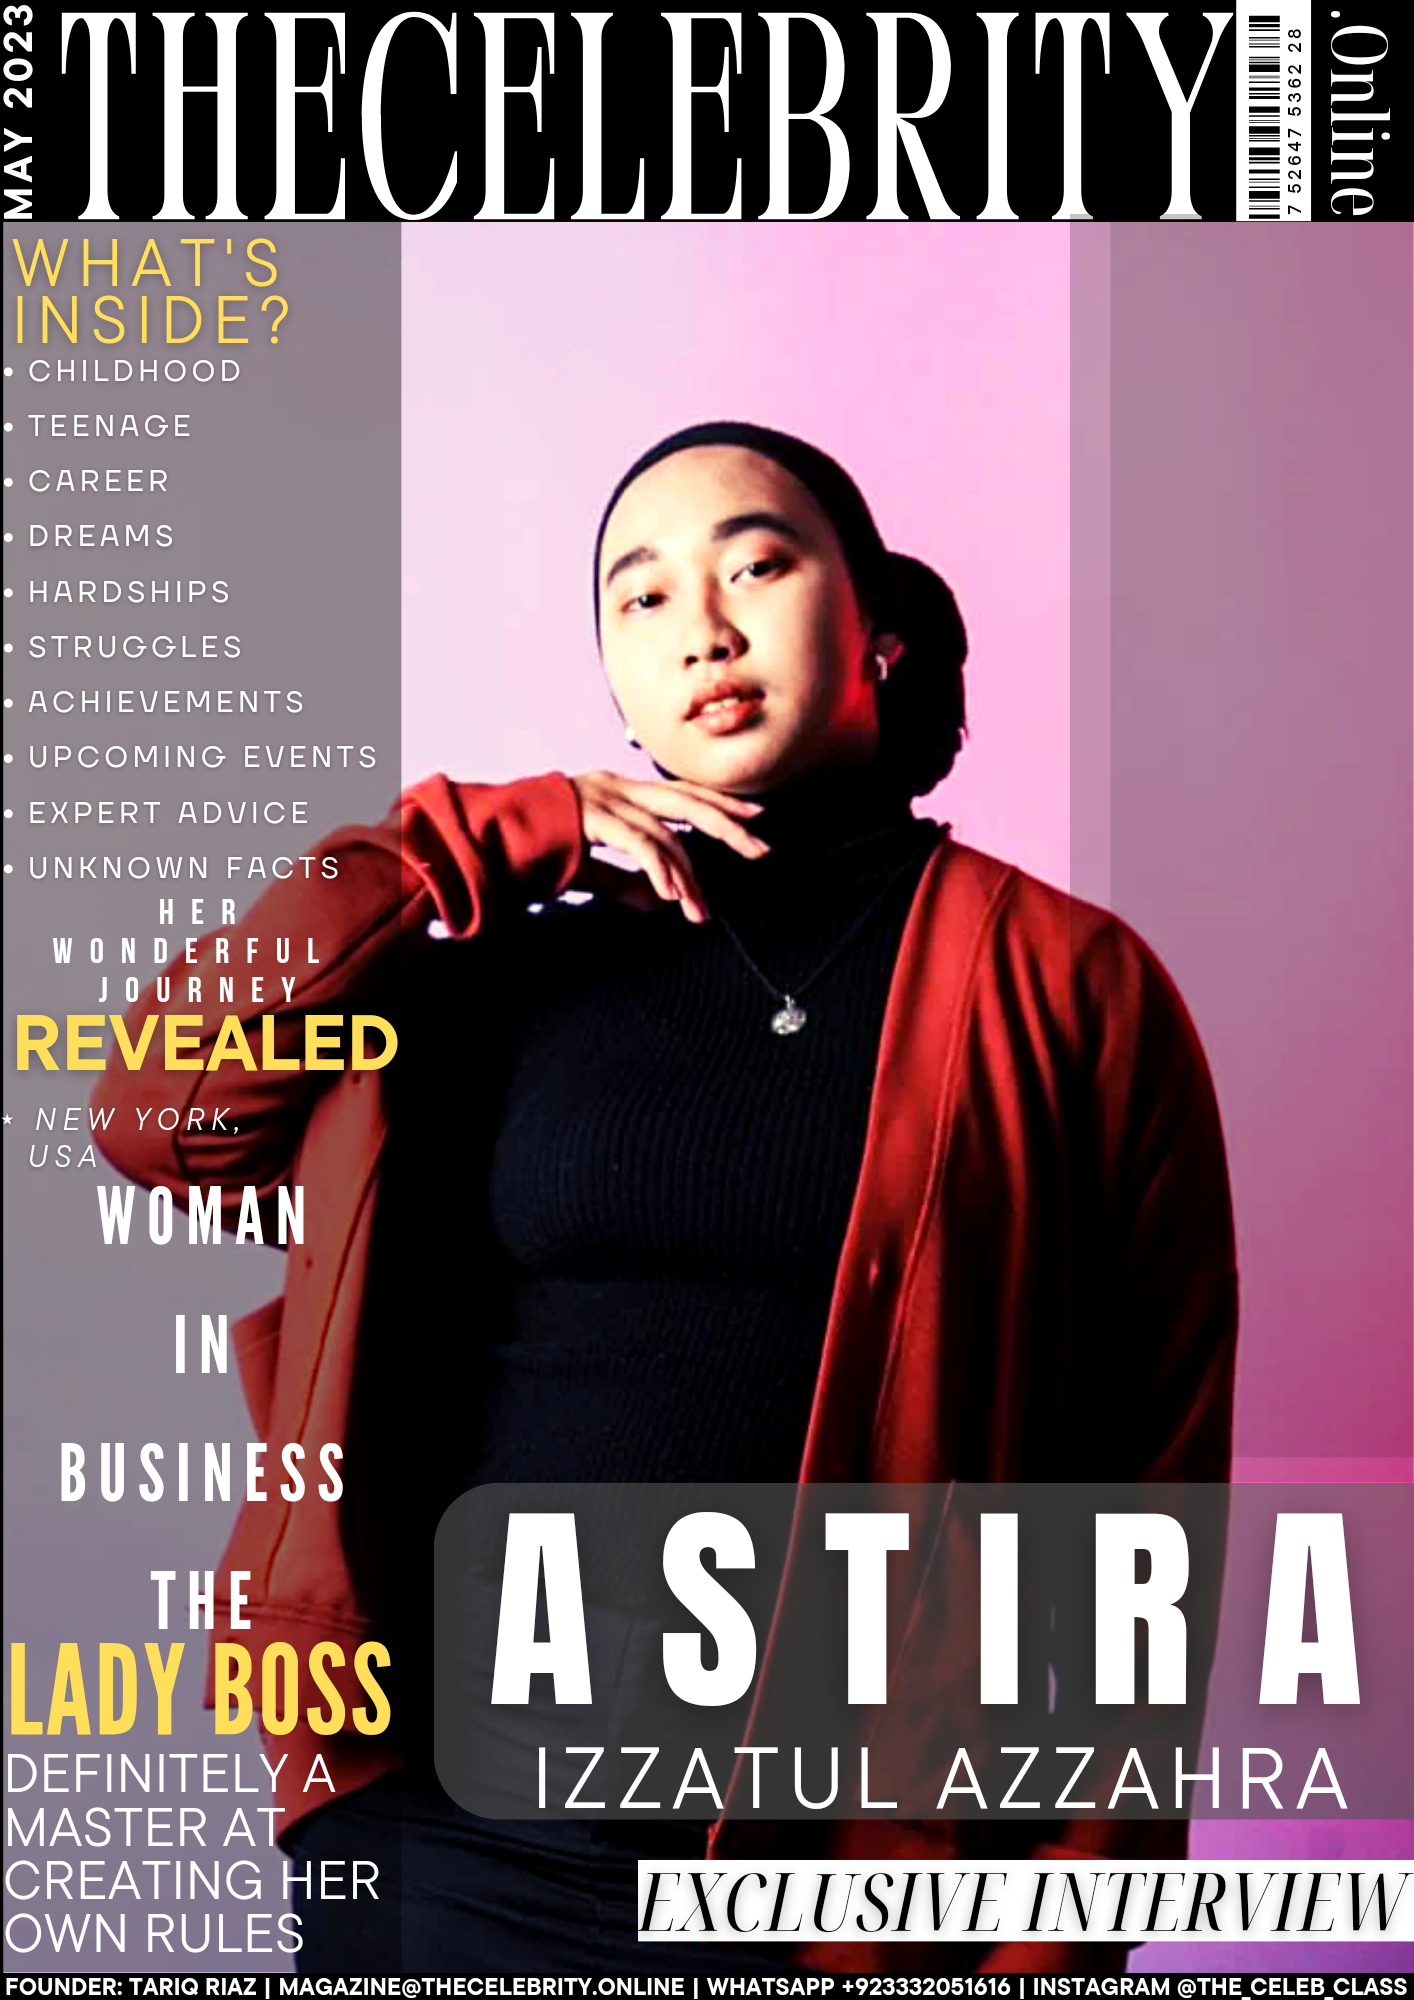 Astira Izzatul Azzahra Exclusive Interview – ‘Being Empathetic To Yourself And Understand Yourself Better’